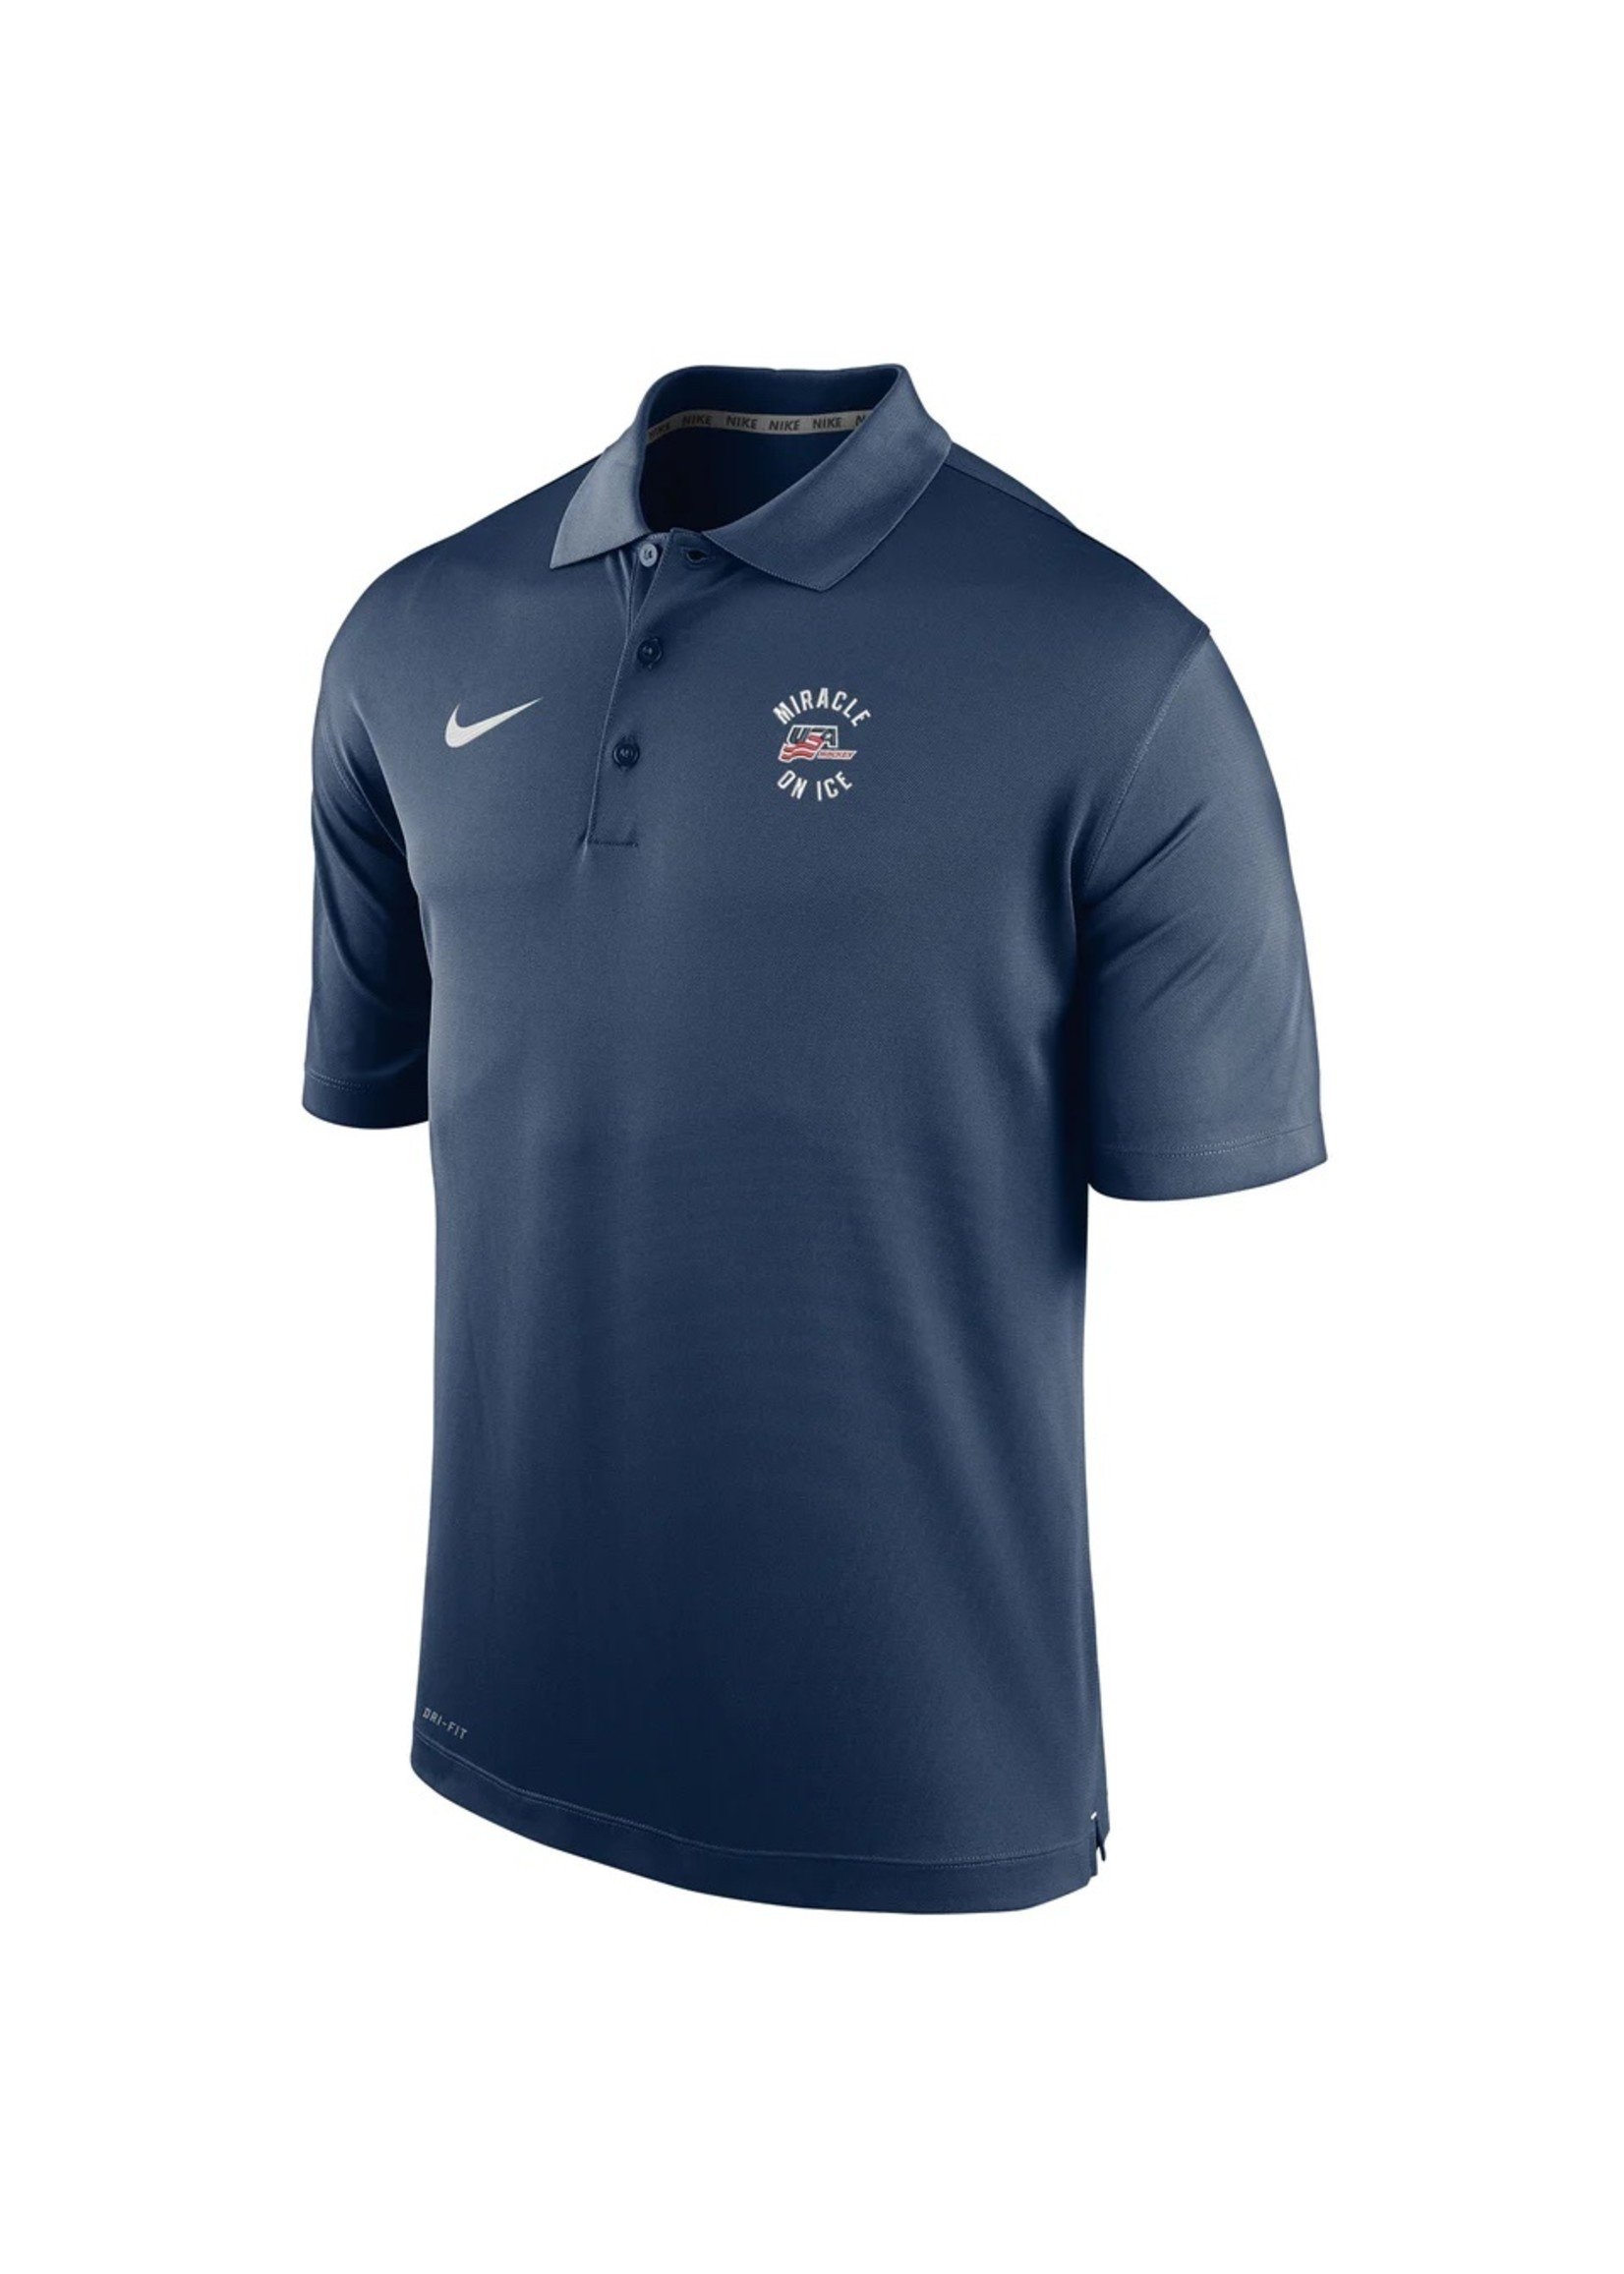 Nike Dri-FIT Miracle on Ice Polo